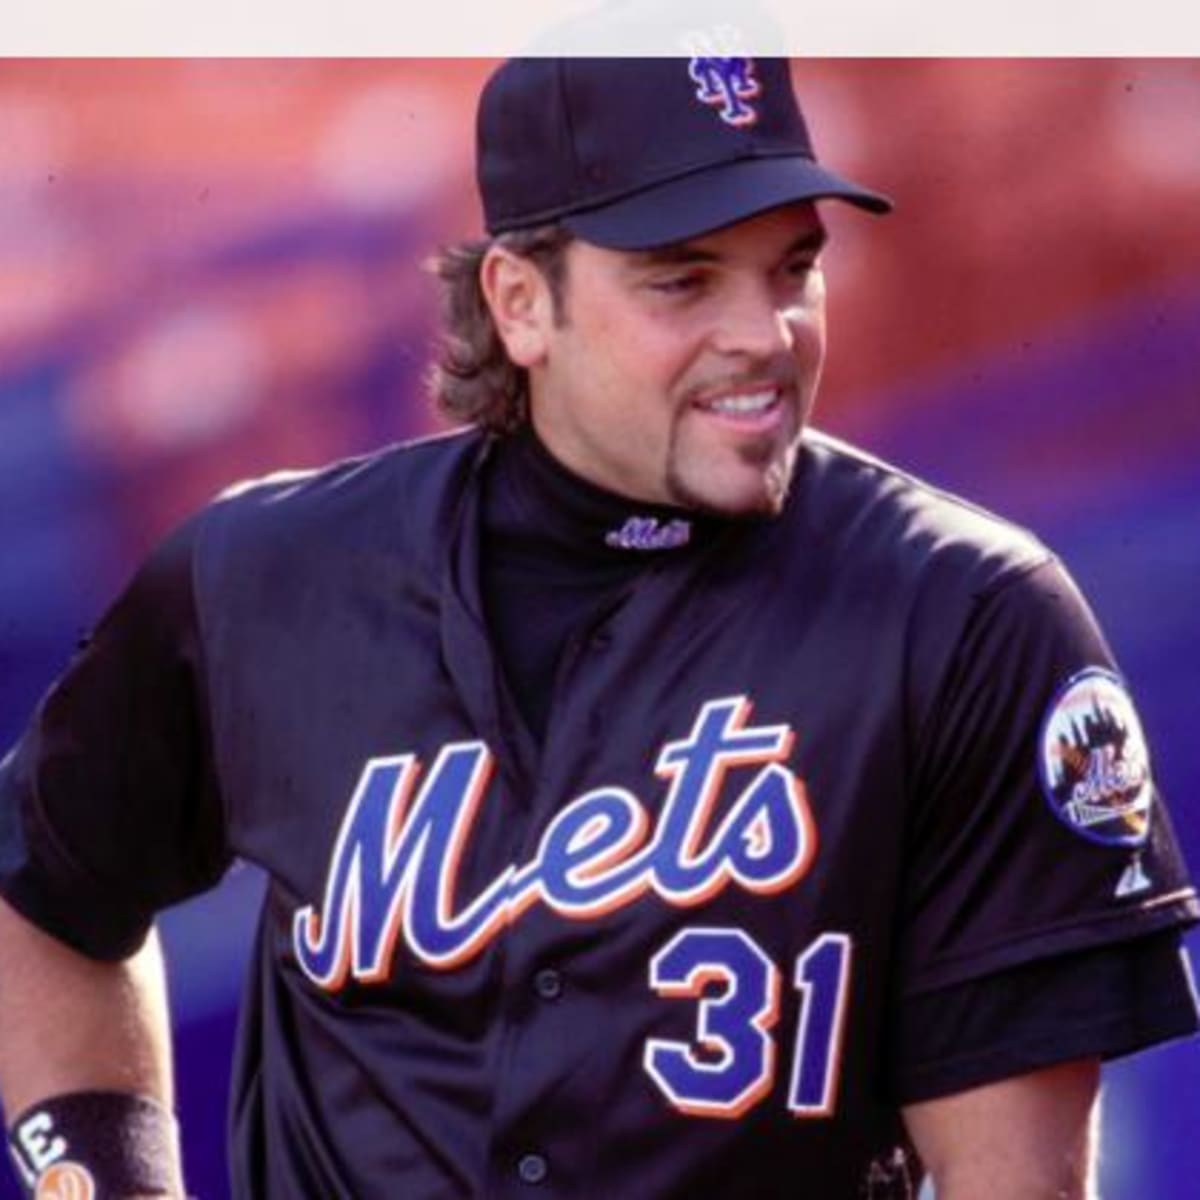 A Detailed Look at the Mets' Black Throwbacks